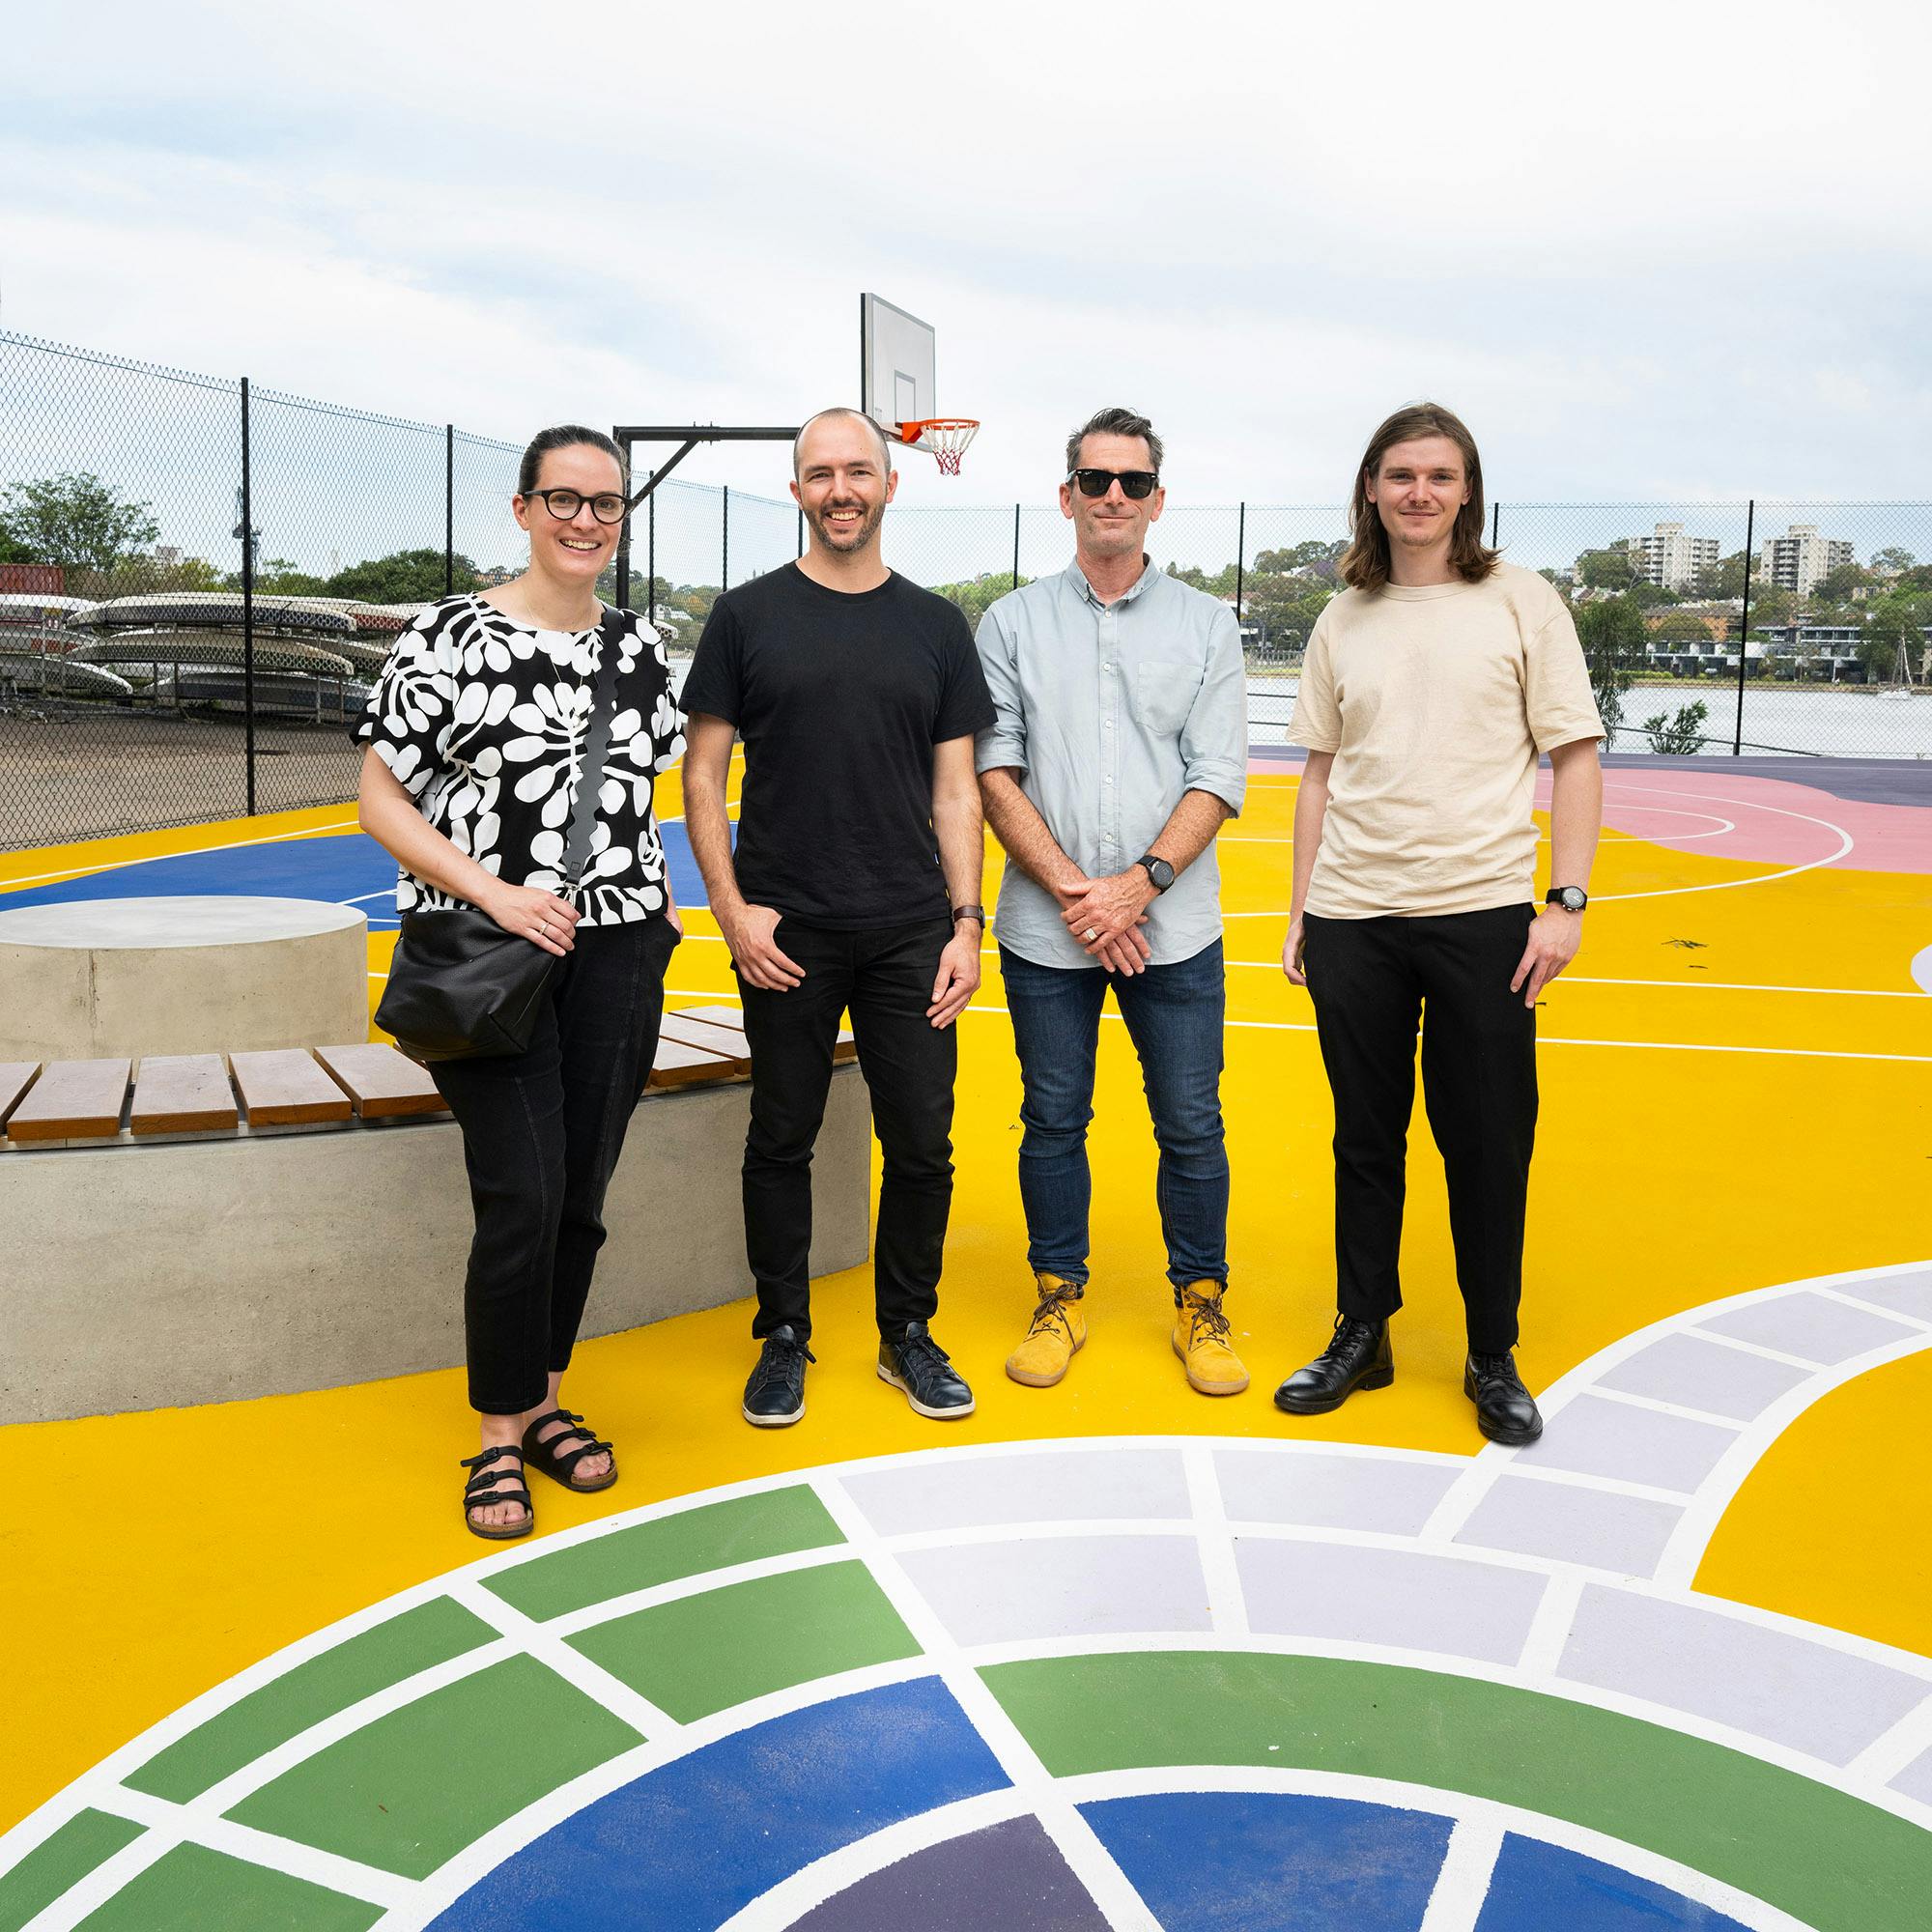 Four people posing for a photo outside on a brightly painted ground. There is a curved bench beside them and a basketball hoop in the background.